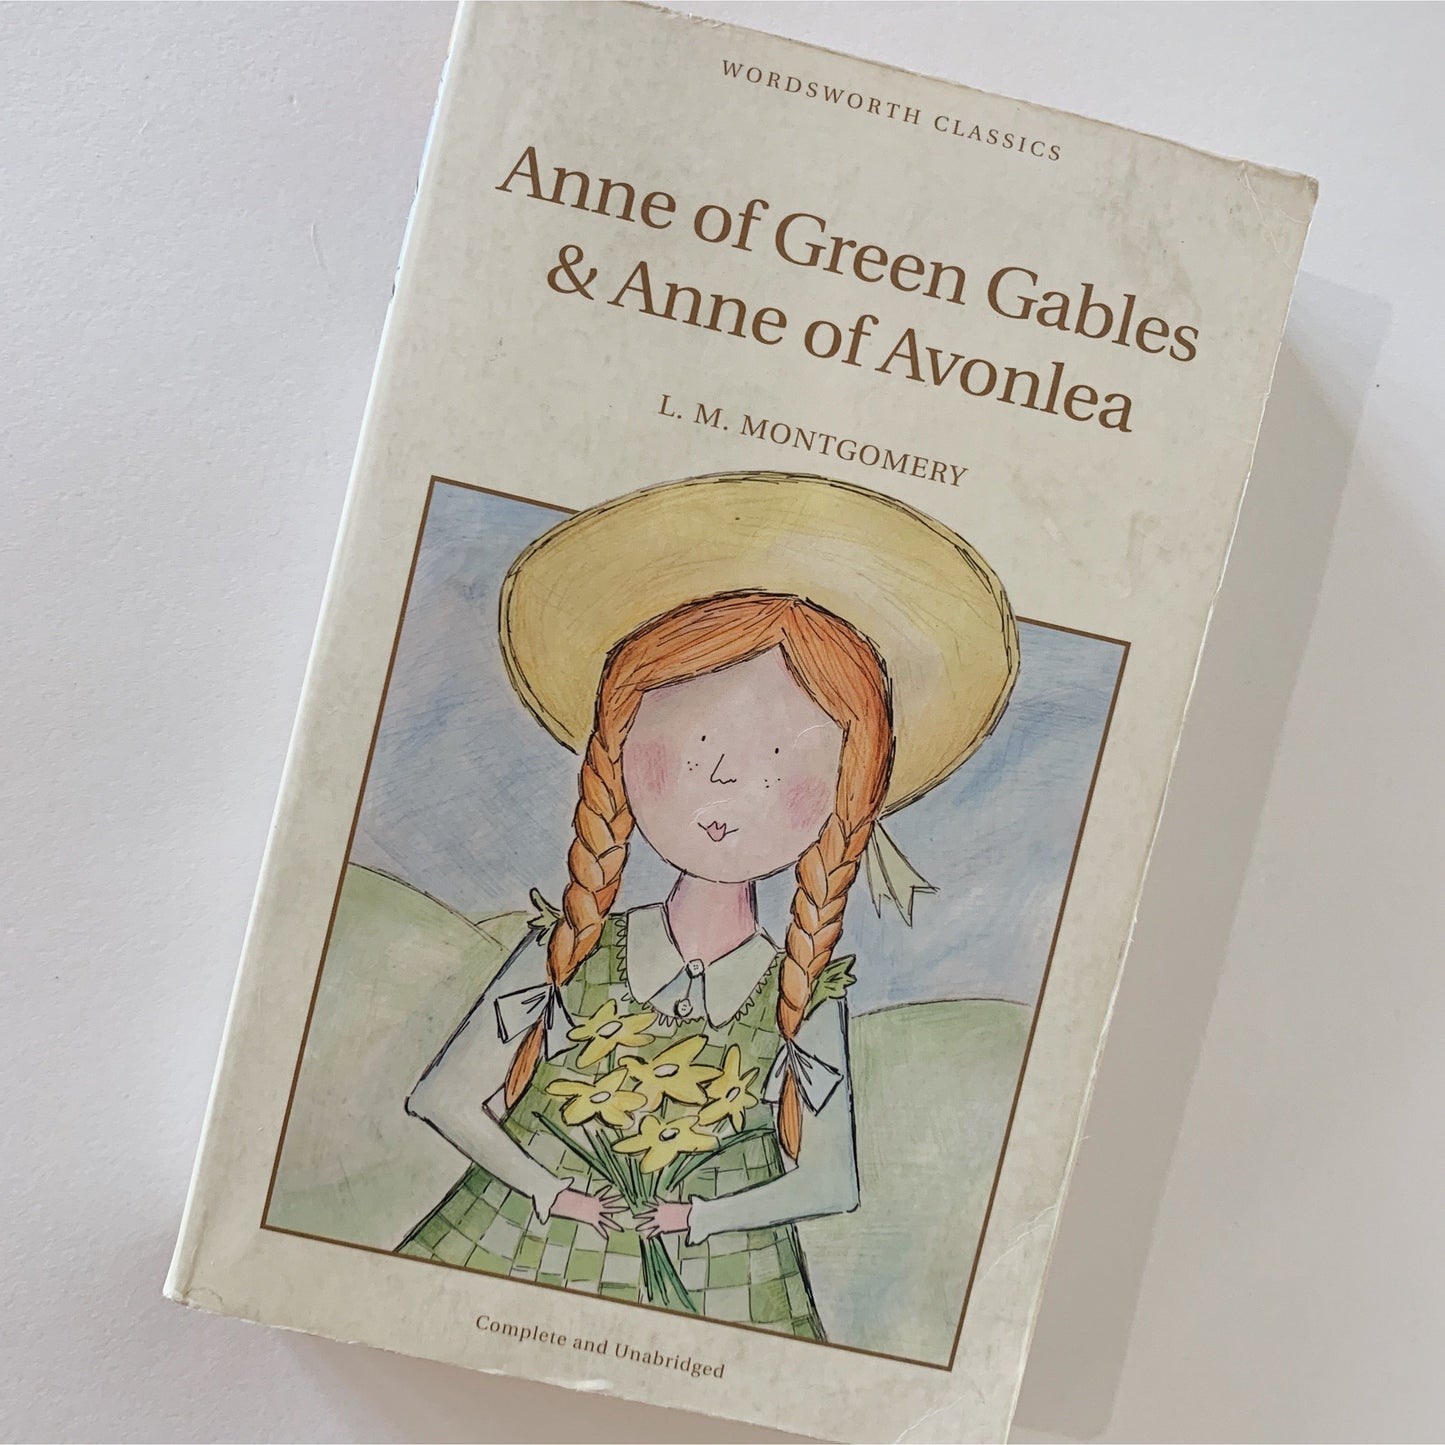 Anne of Green Gables and Anne of Avonlea, Wordsworth Classics, Paperback, 2008